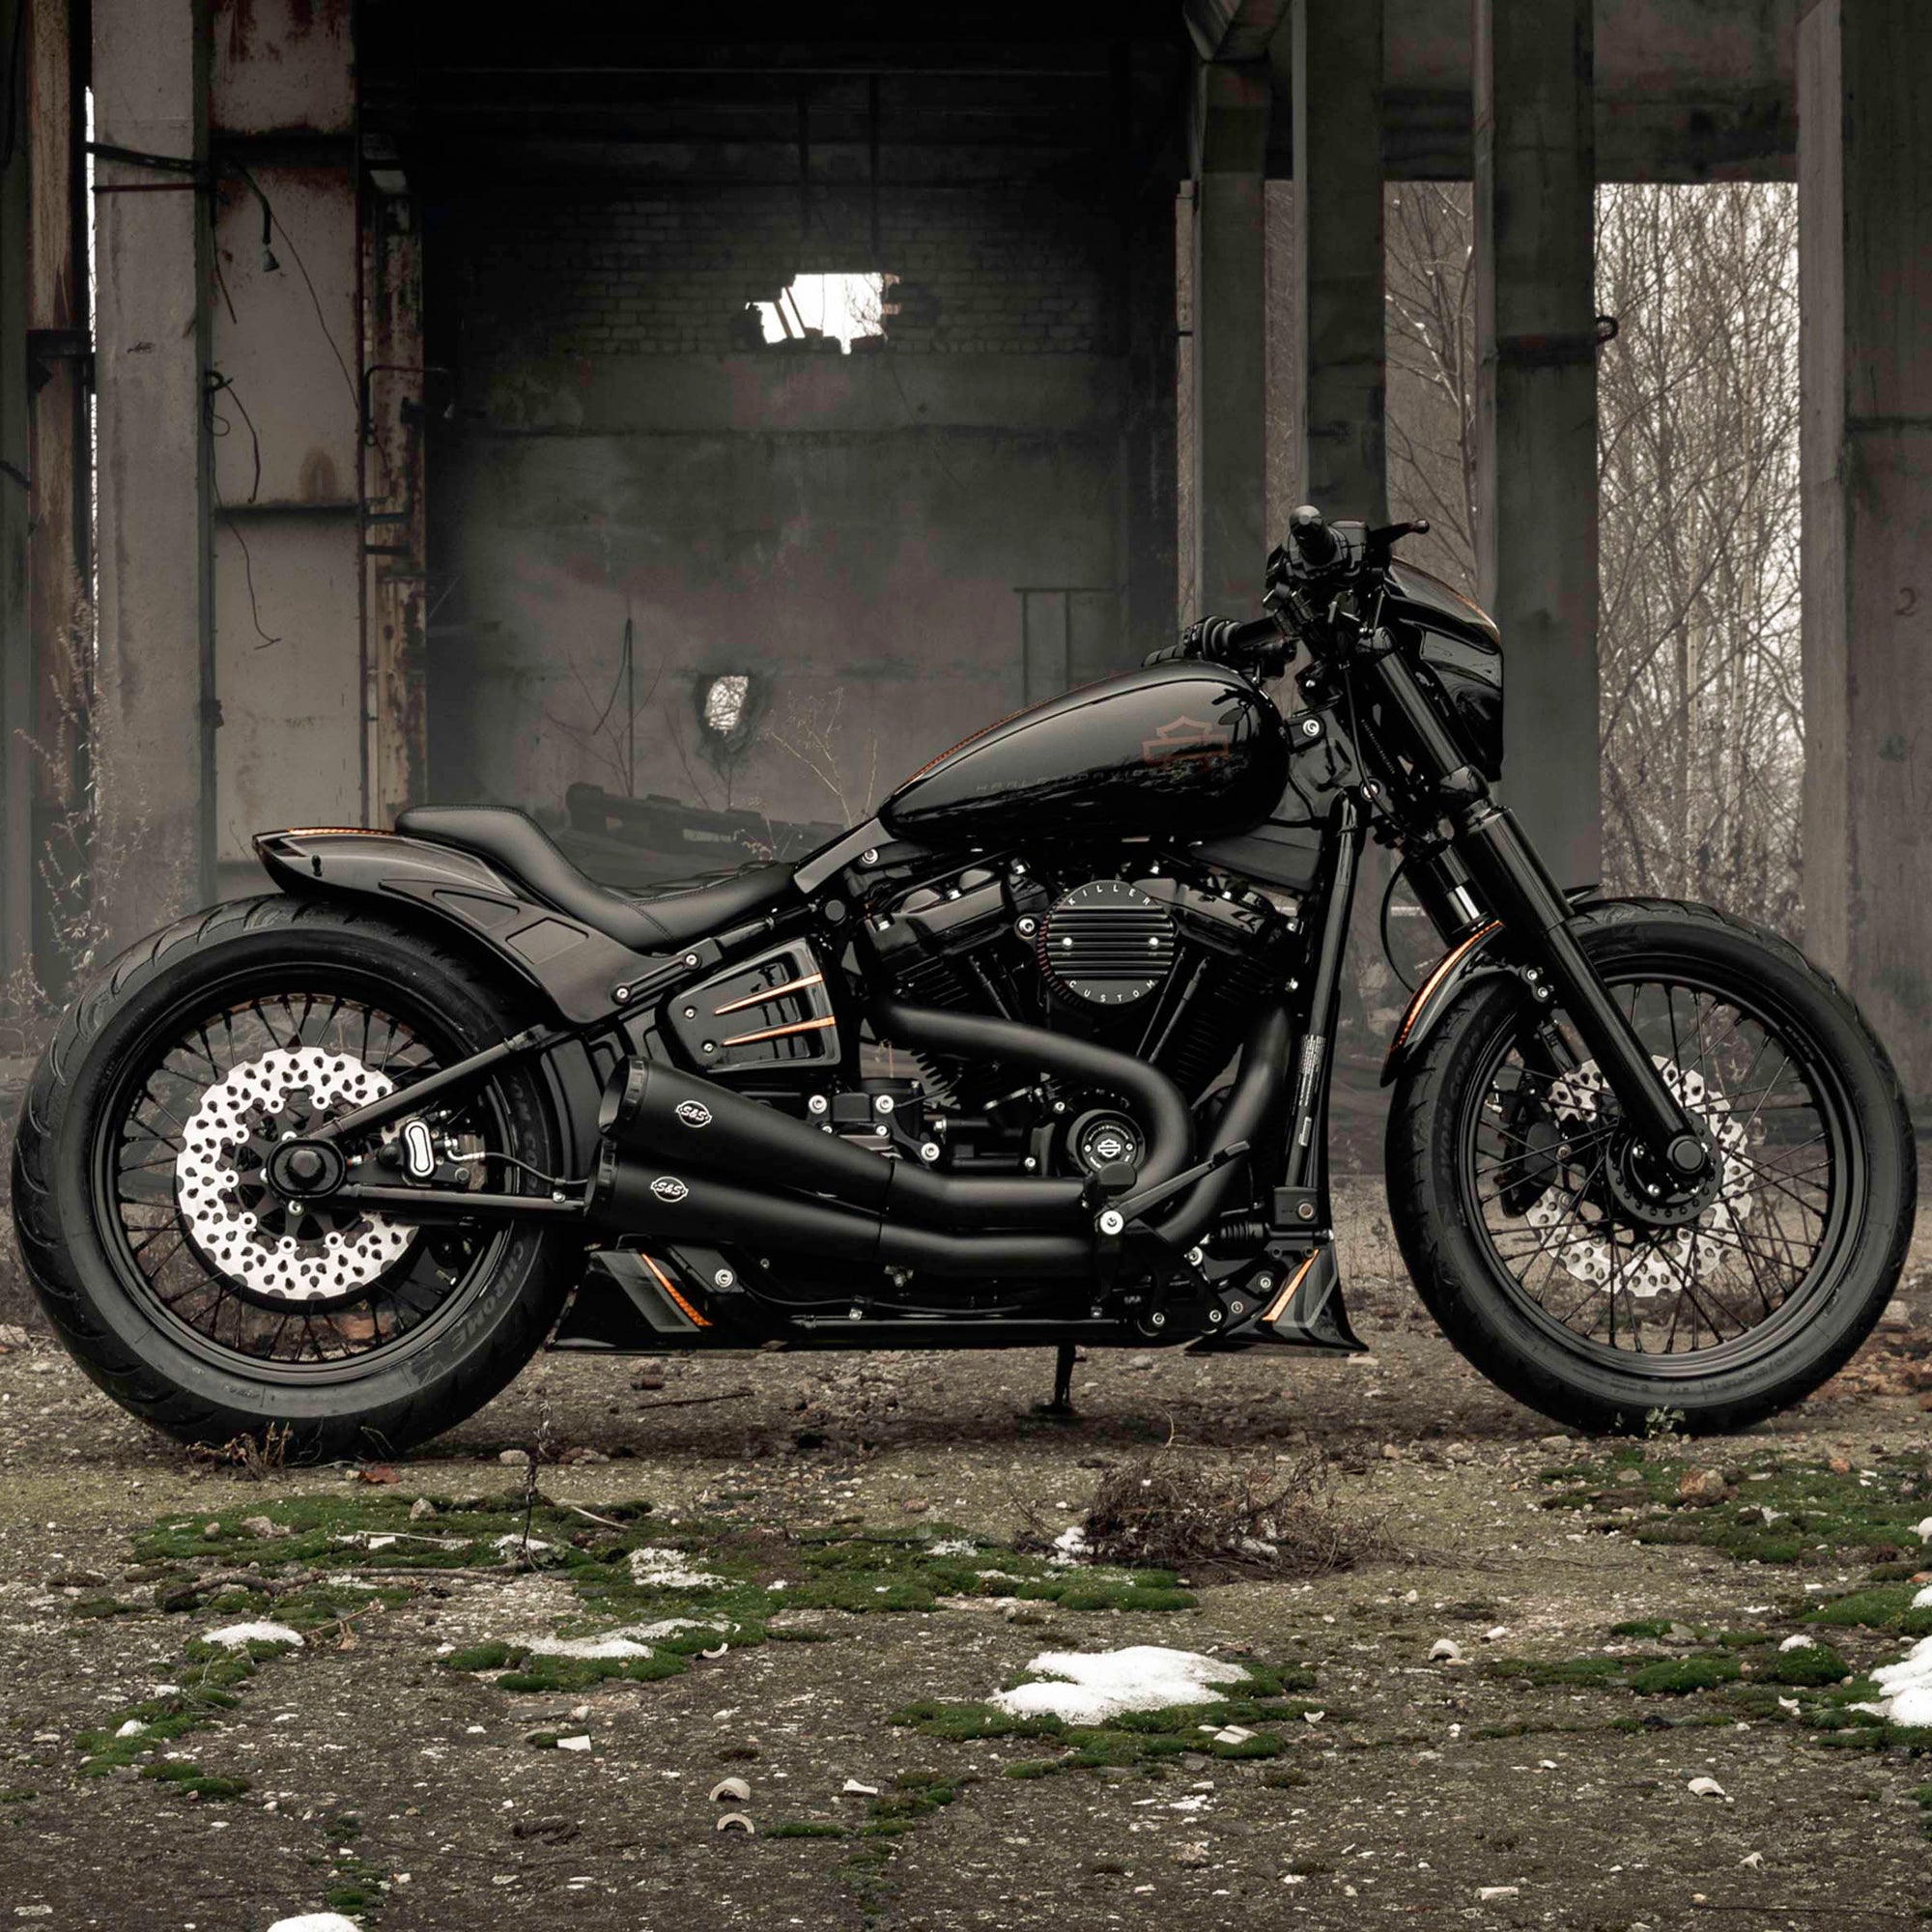 Modified Harley Davidson Street Bob motorcycle with Killer Custom parts from the side outside in an abandoned environment